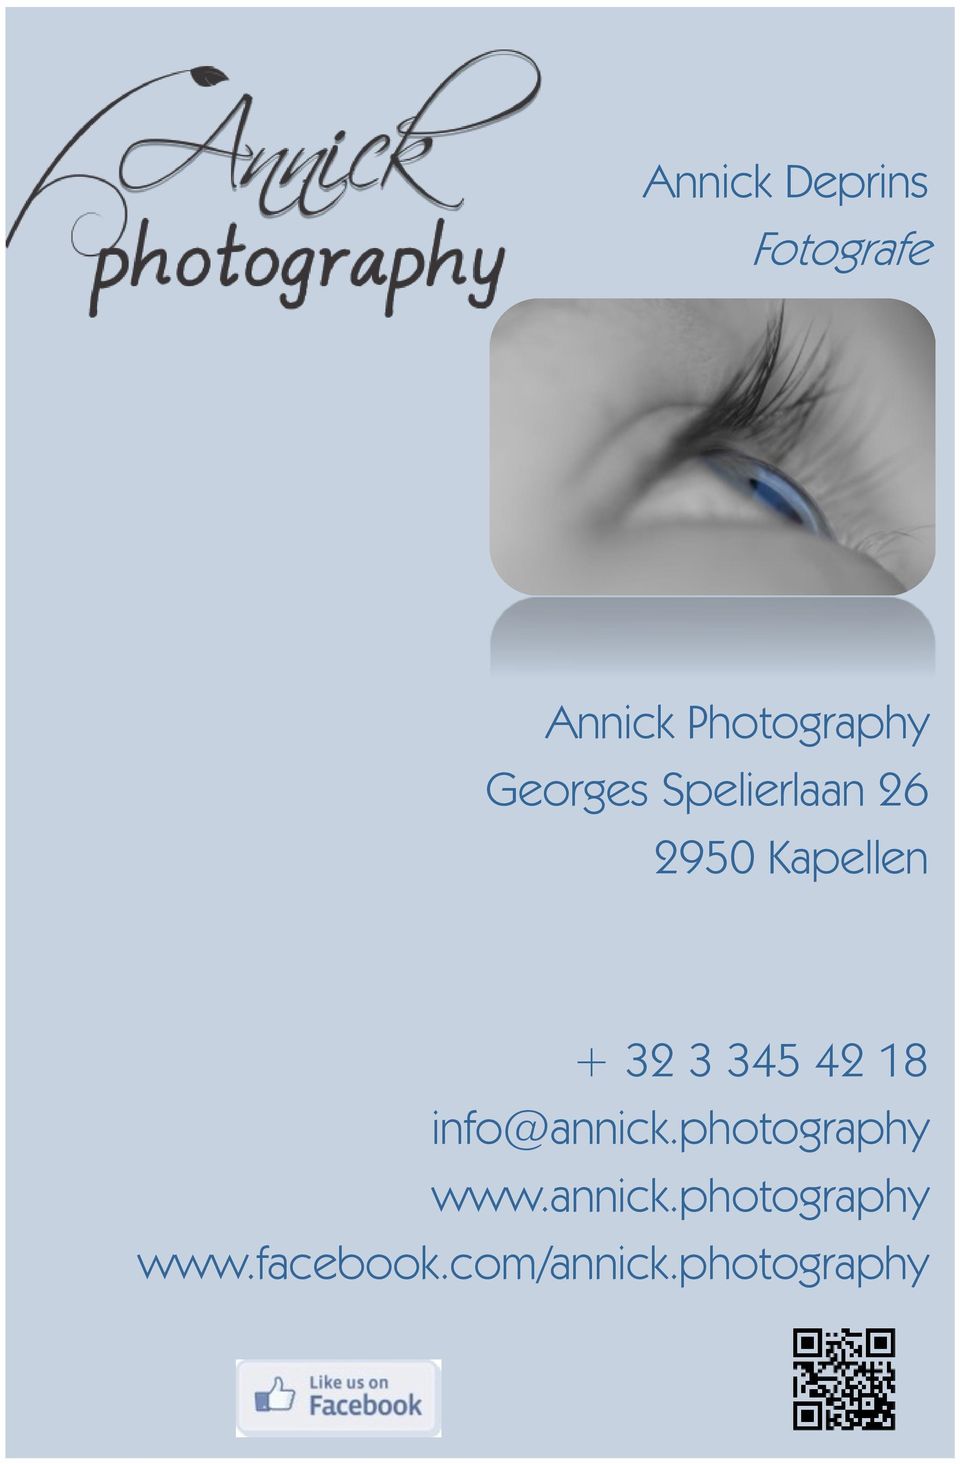 345 42 18 info@annick.photography www.